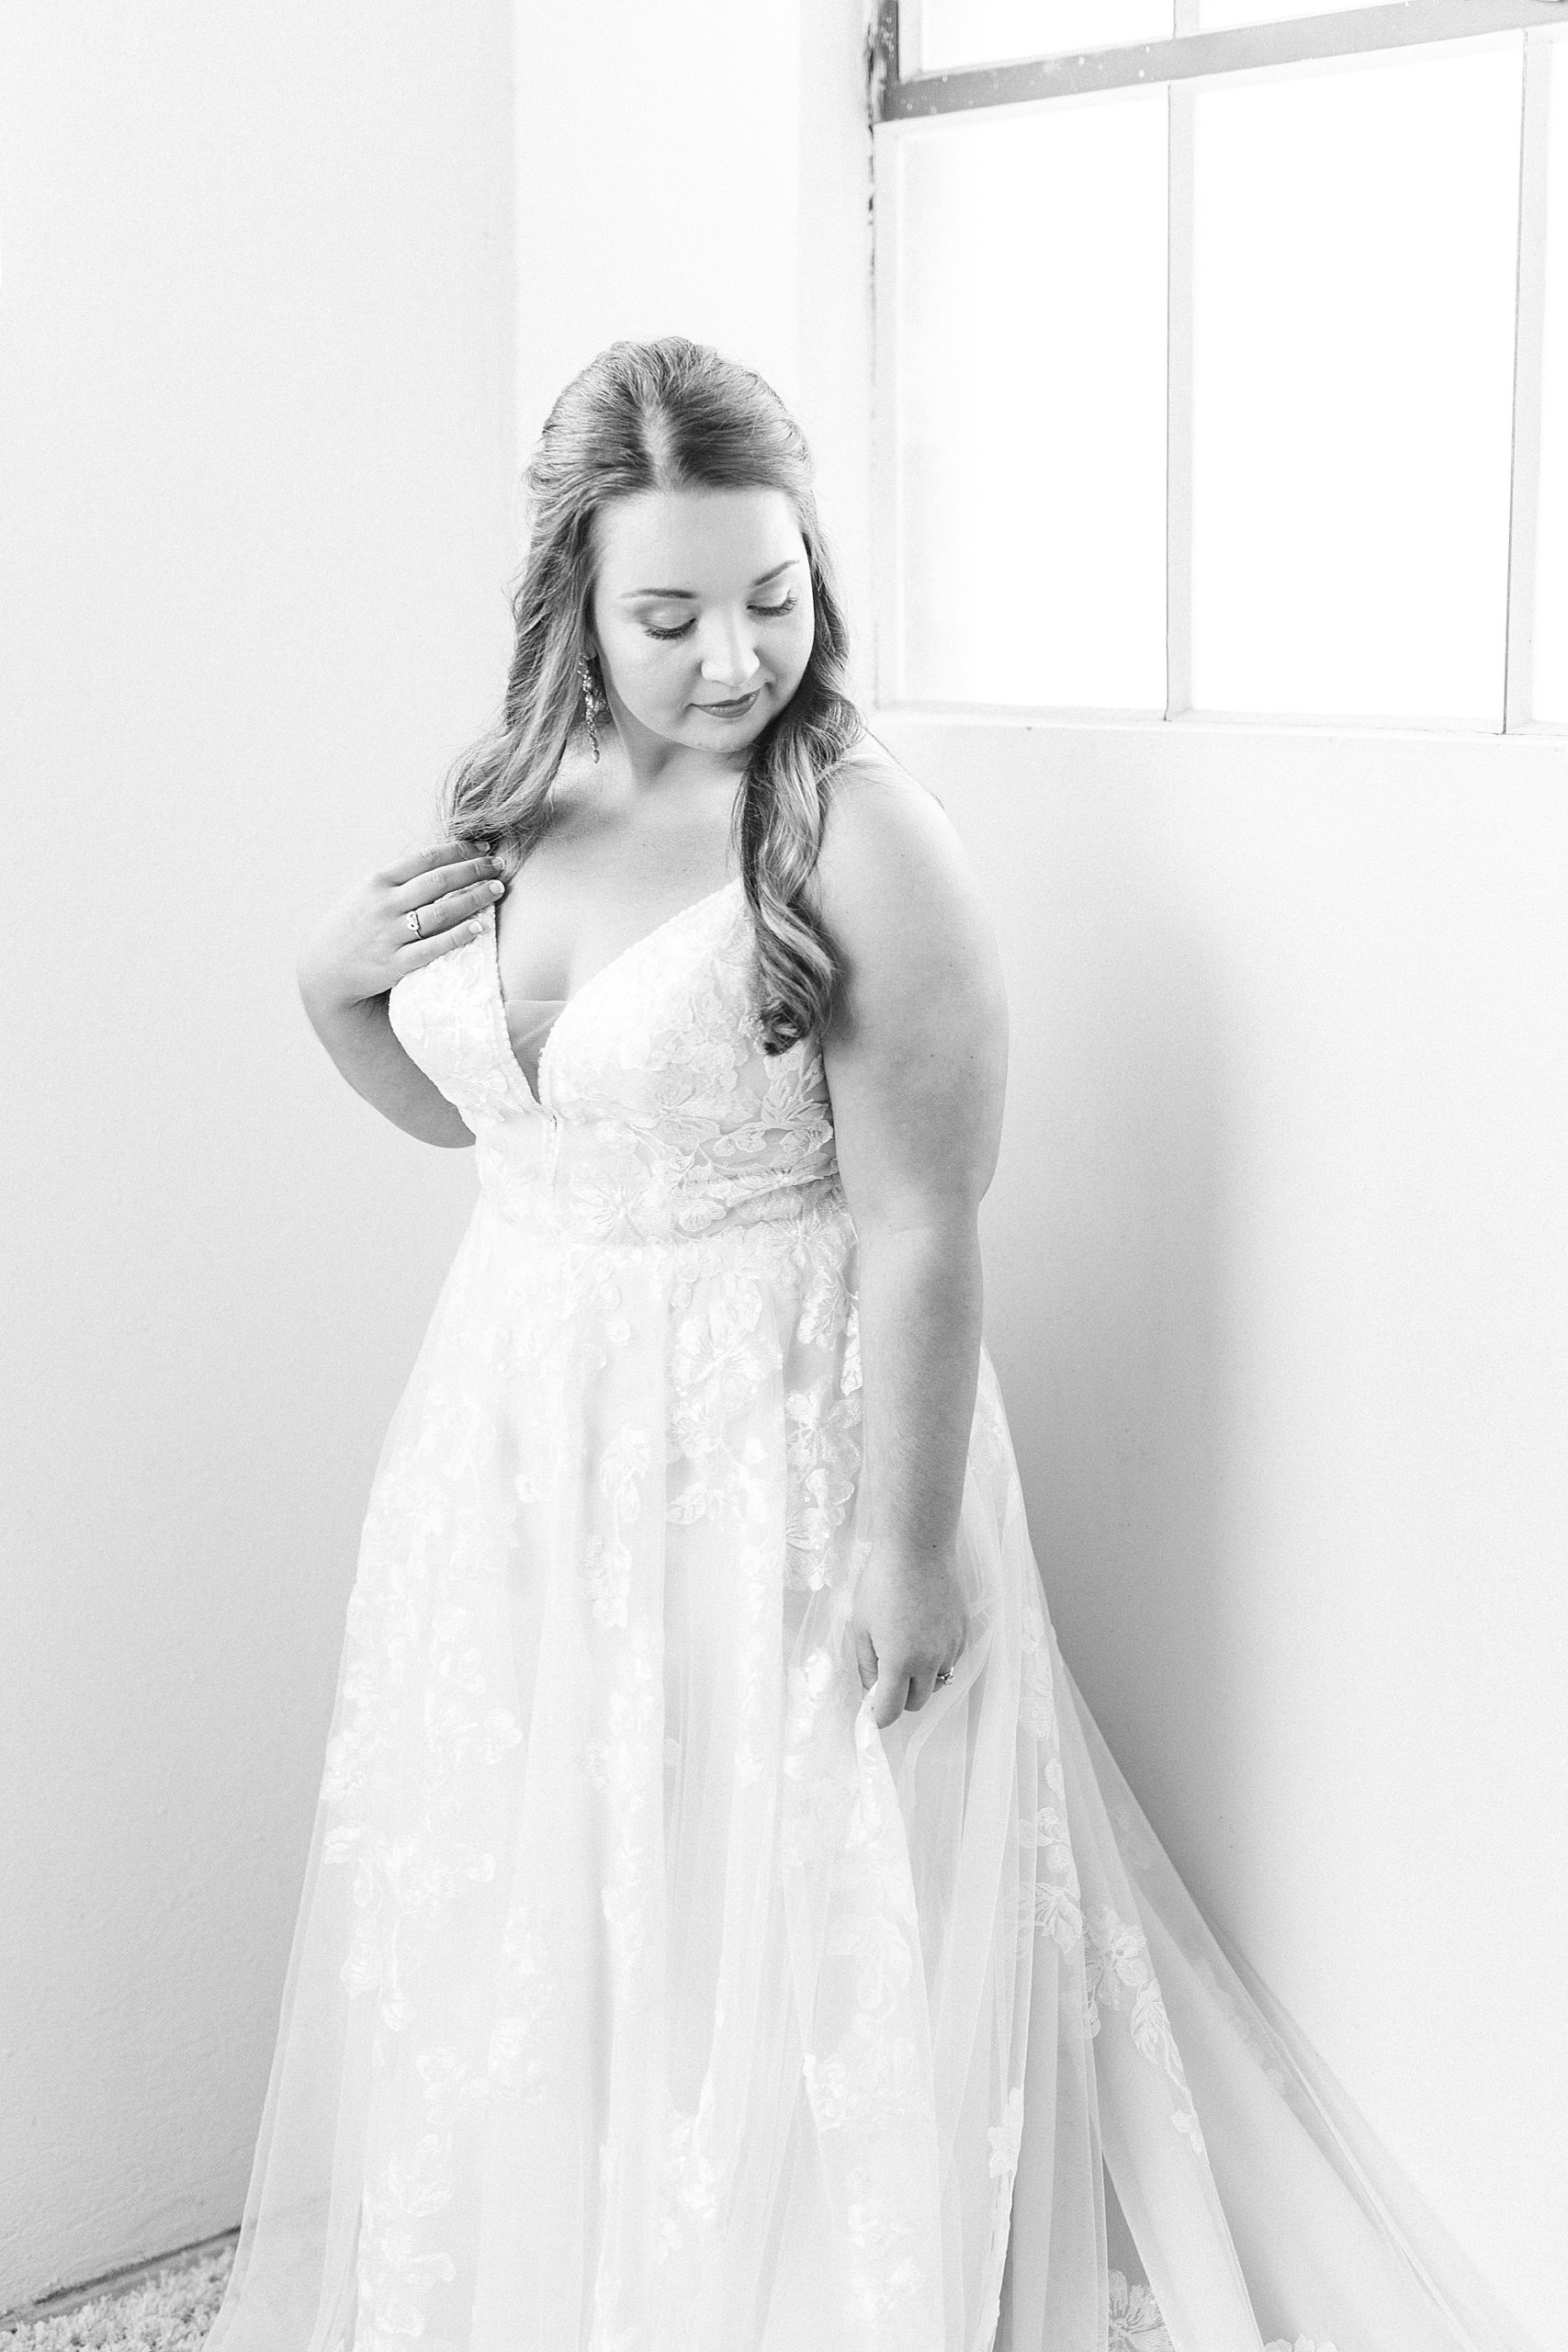 black and white portrait of bride at Cadillac Service Garage